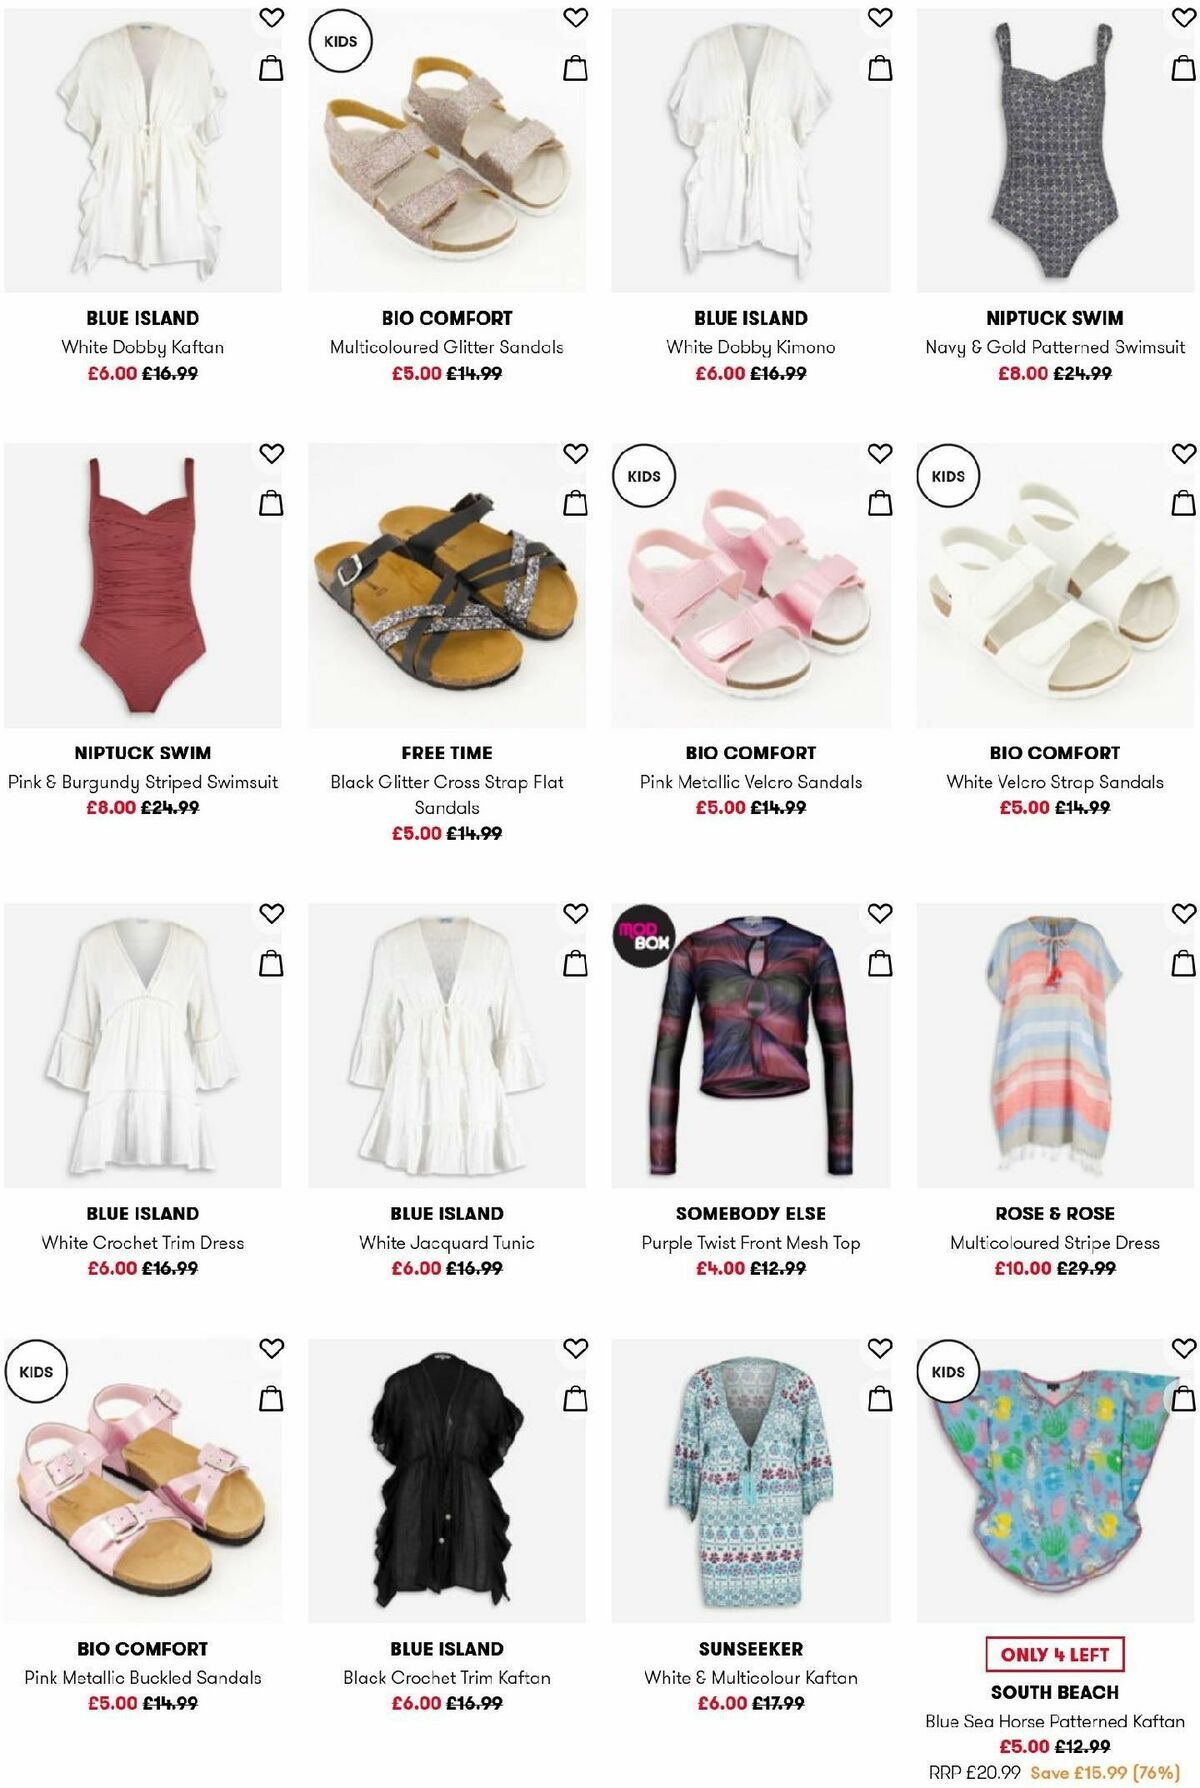 TK Maxx Offers from 9 August